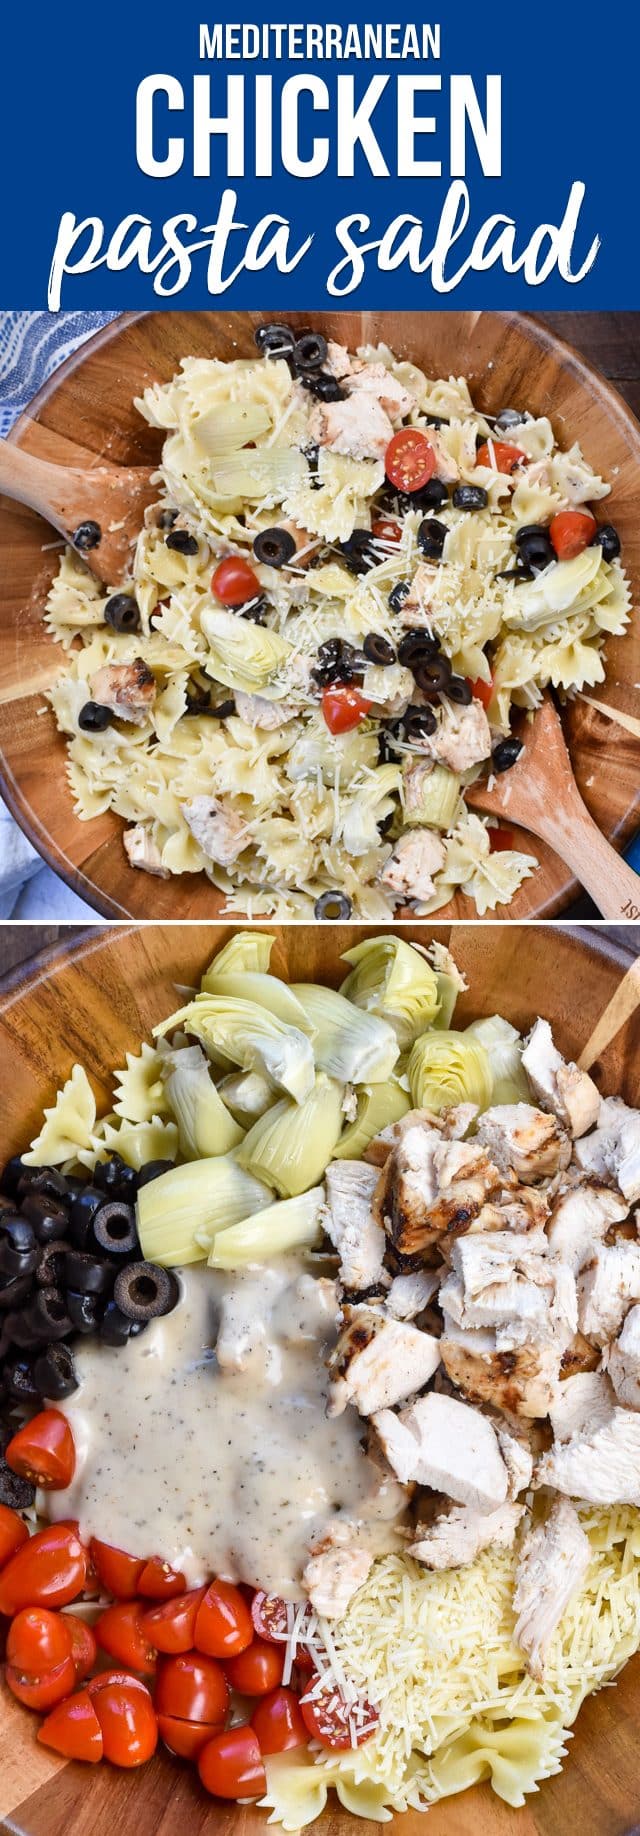 An Easy Creamy Mediterranean Chicken Pasta Salad is the perfect lunch or dinner for summer. Grilled chicken is mixed with a creamy parmesan garlic dressing for the perfect combination of mediterranean flavors.